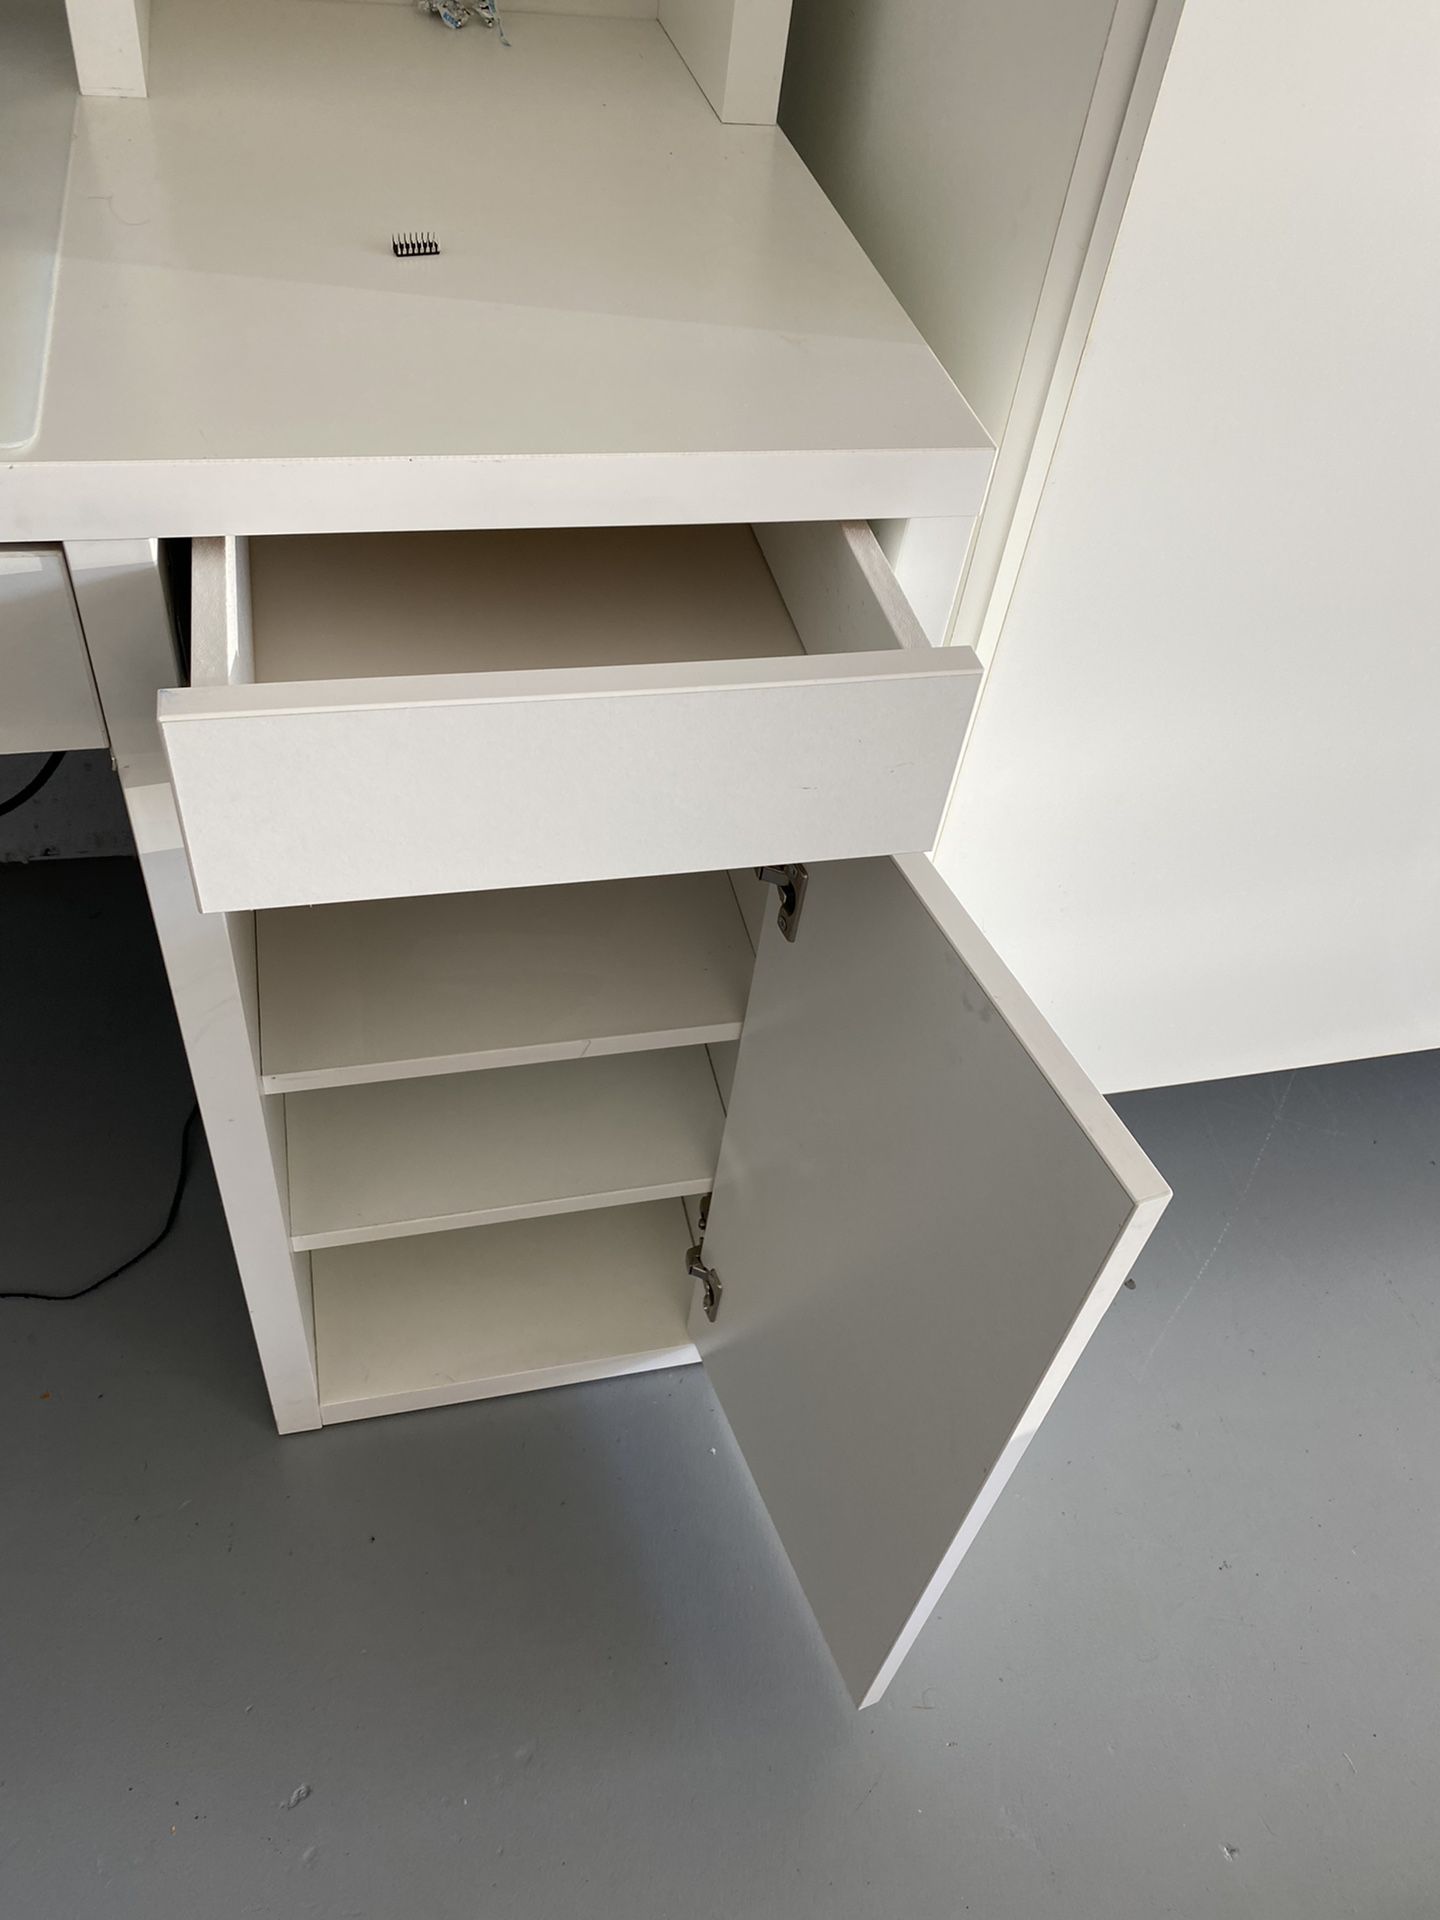 IKEA Computer Desk ( Monitor Not Included)